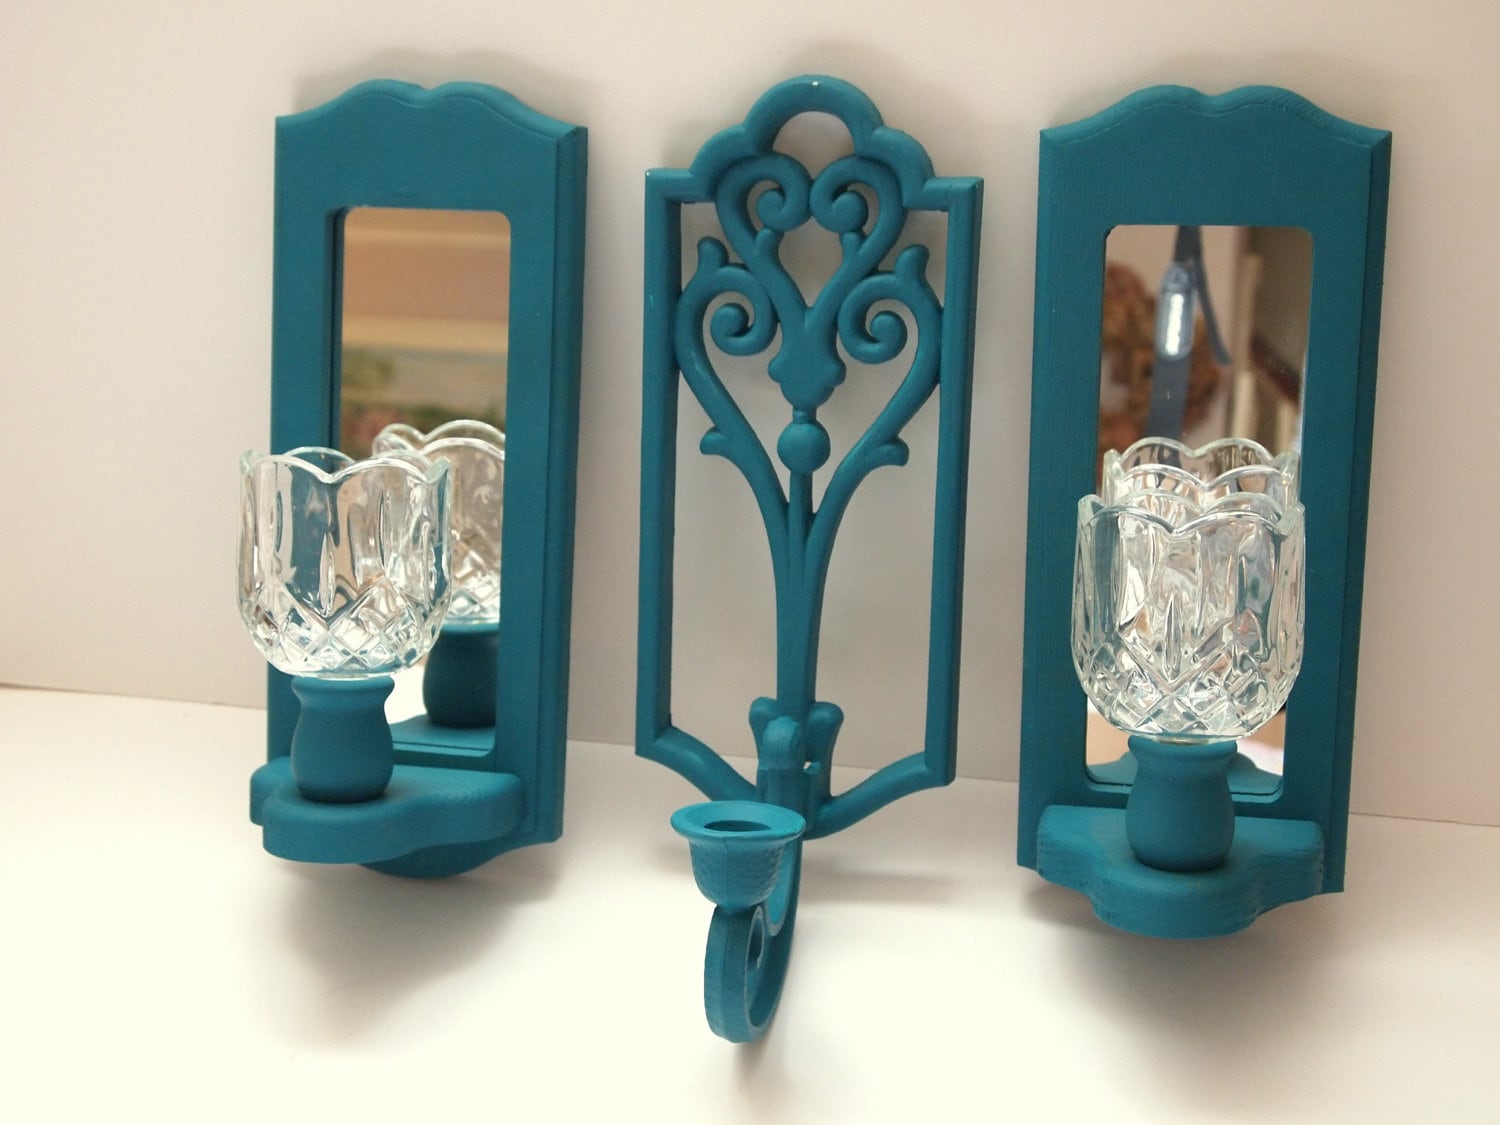 Mirror Wall Teal Candle Sconce Set of Three by MollyMcShabby